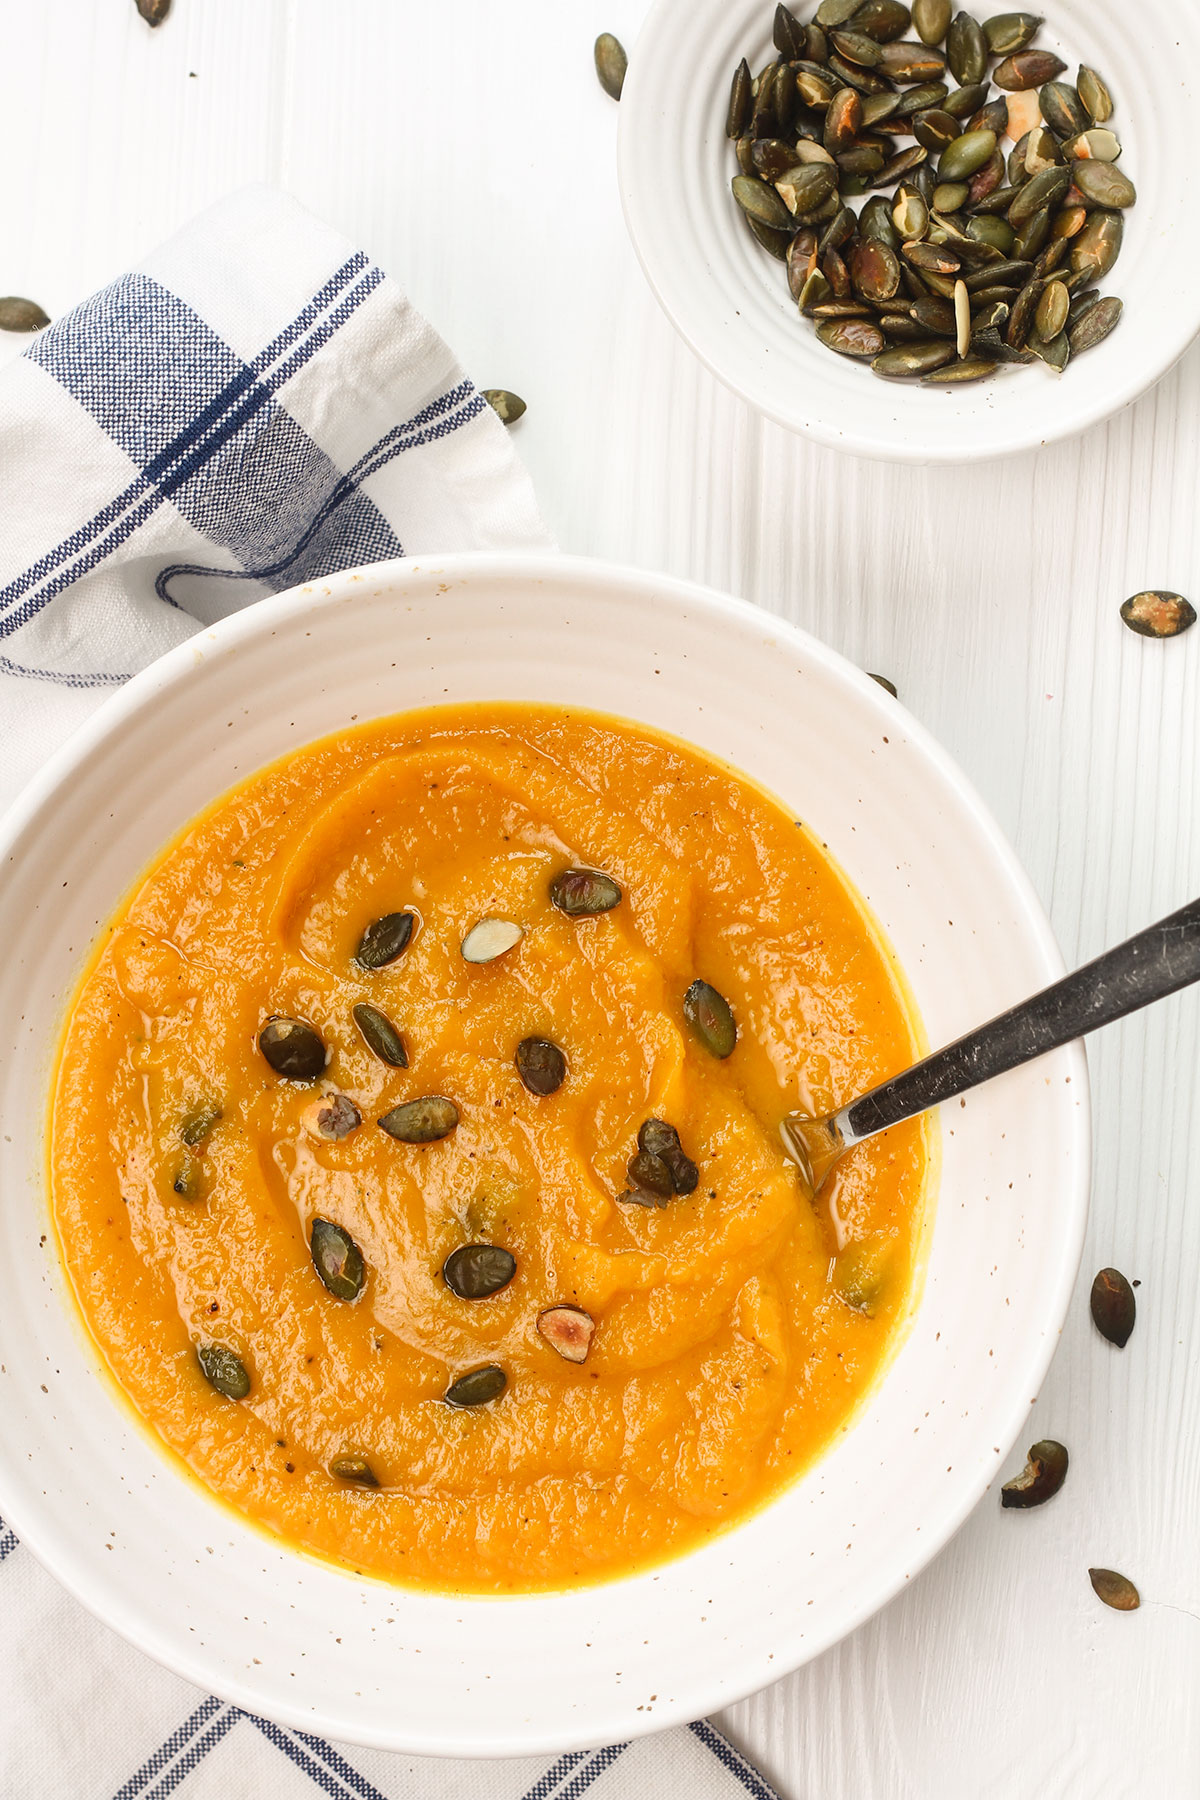 A bowl of pumpkin soup on a white background with a small bowl of pumpkin seeds.